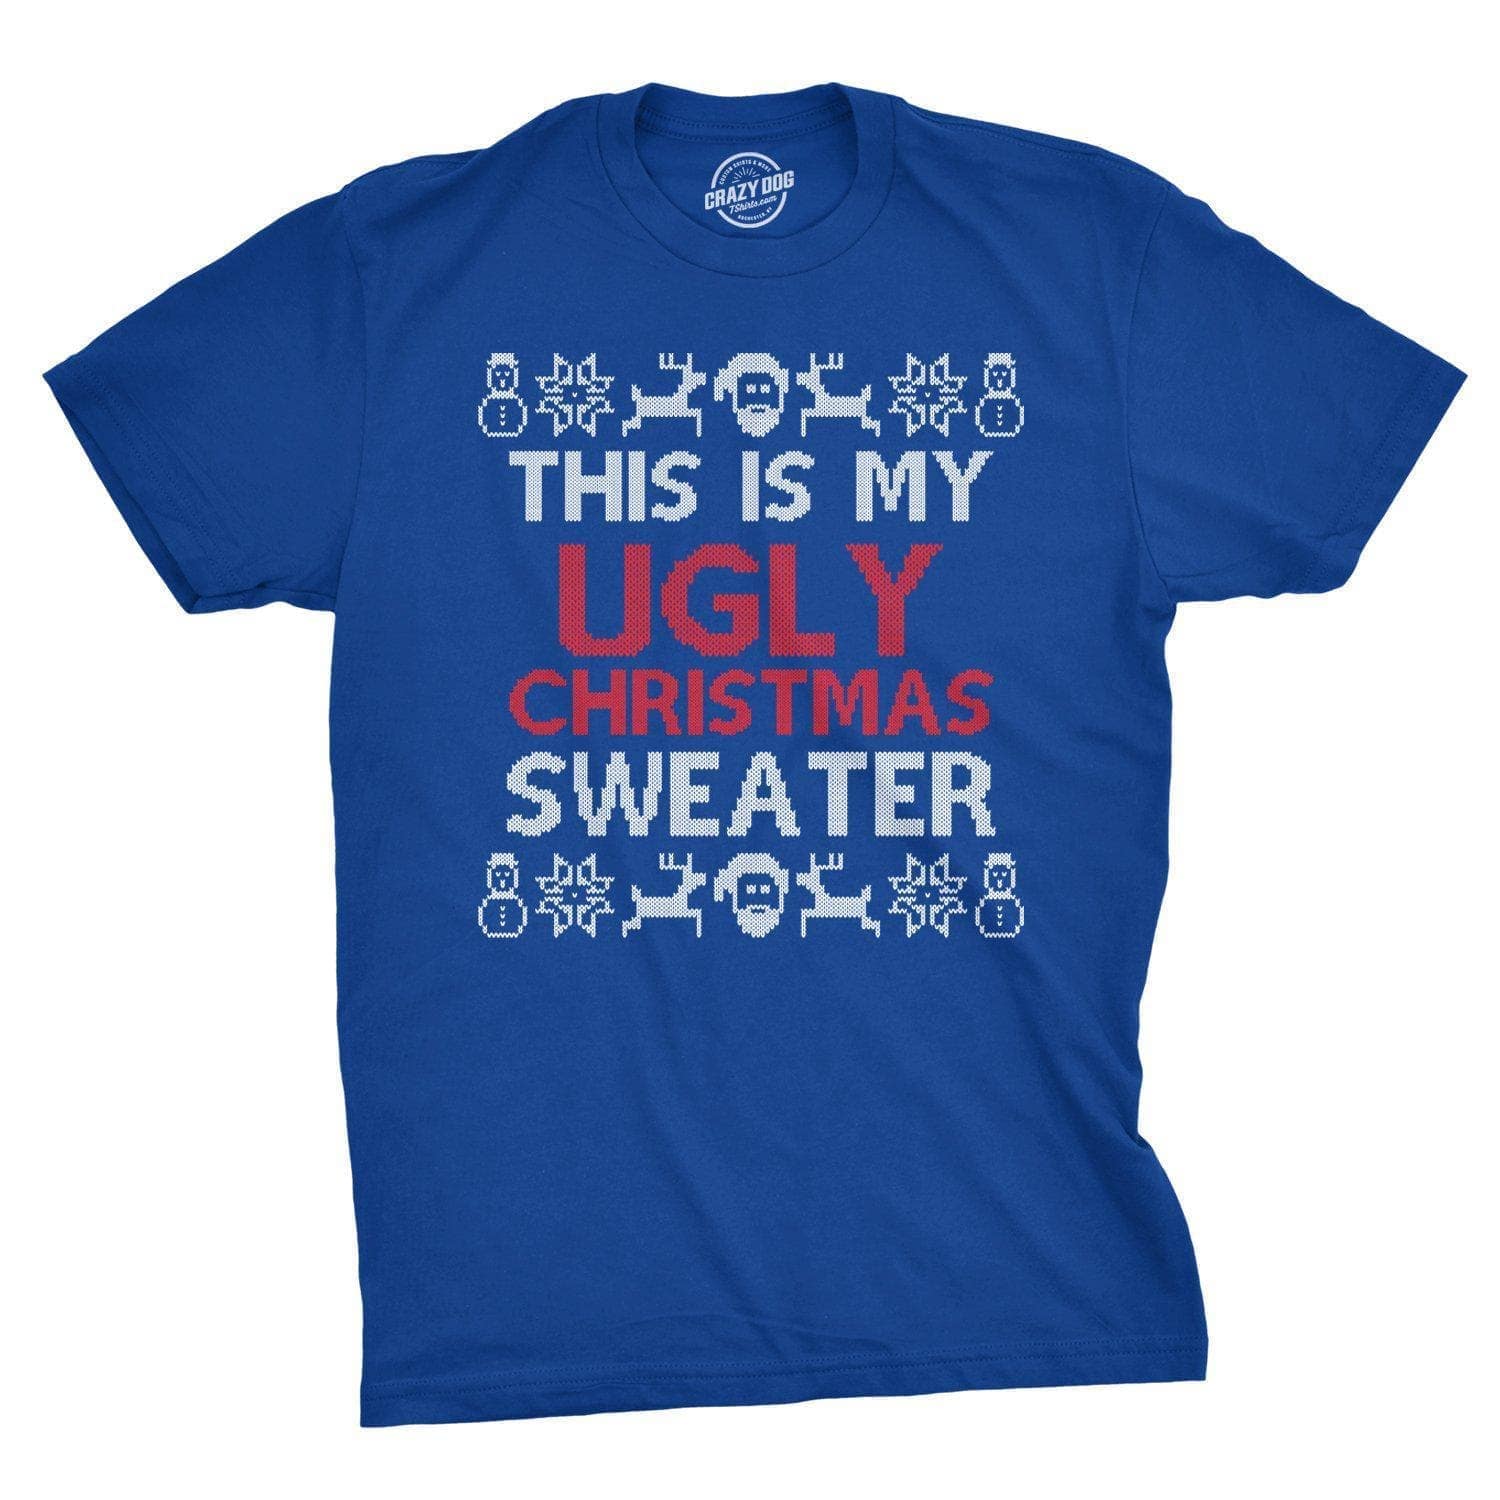 This Is My Ugly Christmas Sweater Men's Tshirt - Crazy Dog T-Shirts